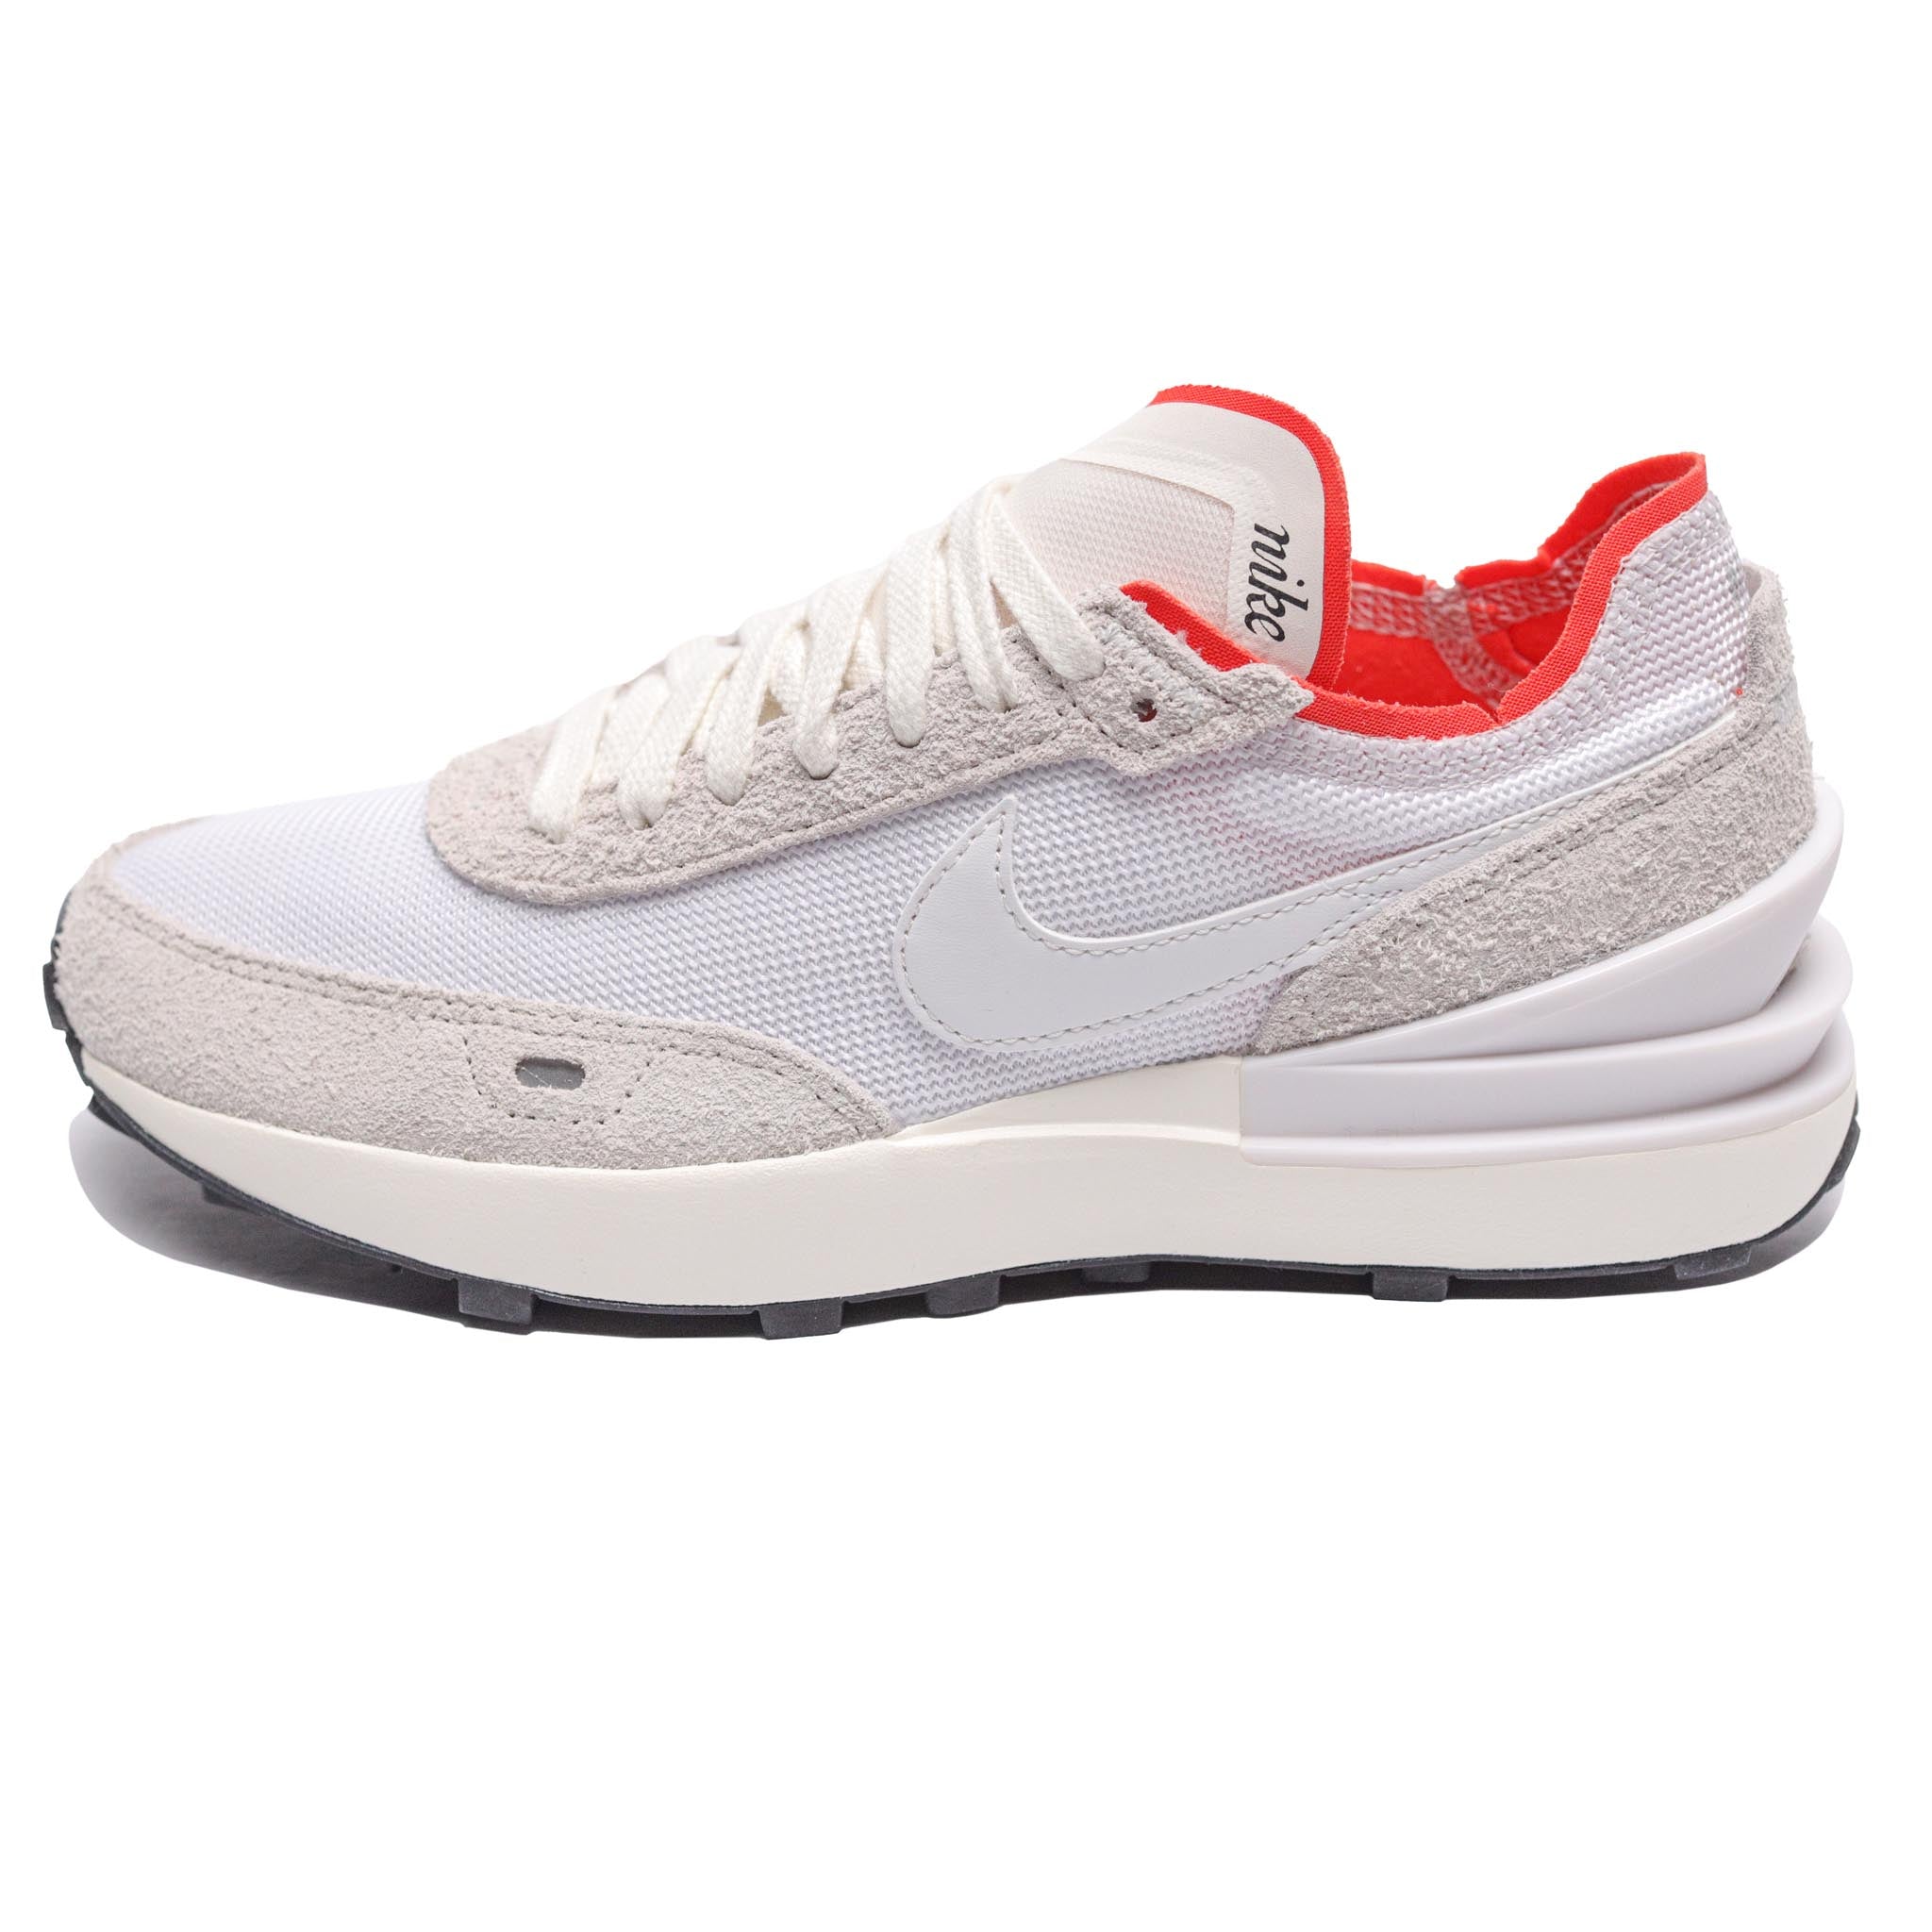 Nike Waffle One VNTG 'Summit White/Picante Red'